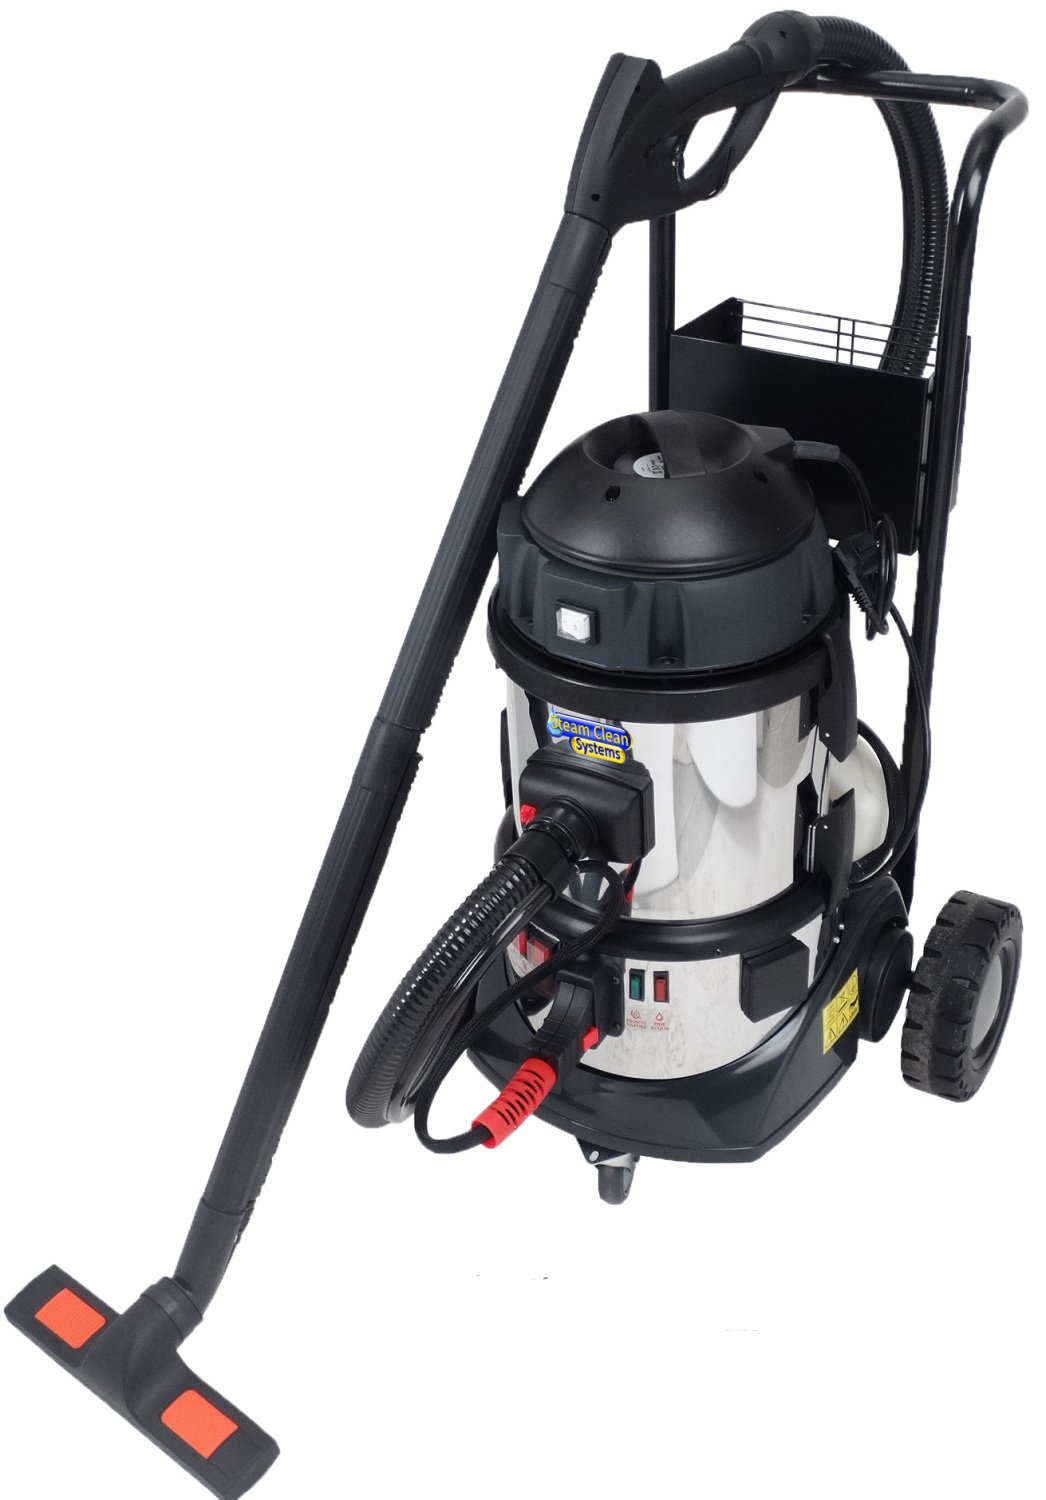 SC2000 2.6 kg/hr Commercial Steam and Vacuum Cleaner with Trolley